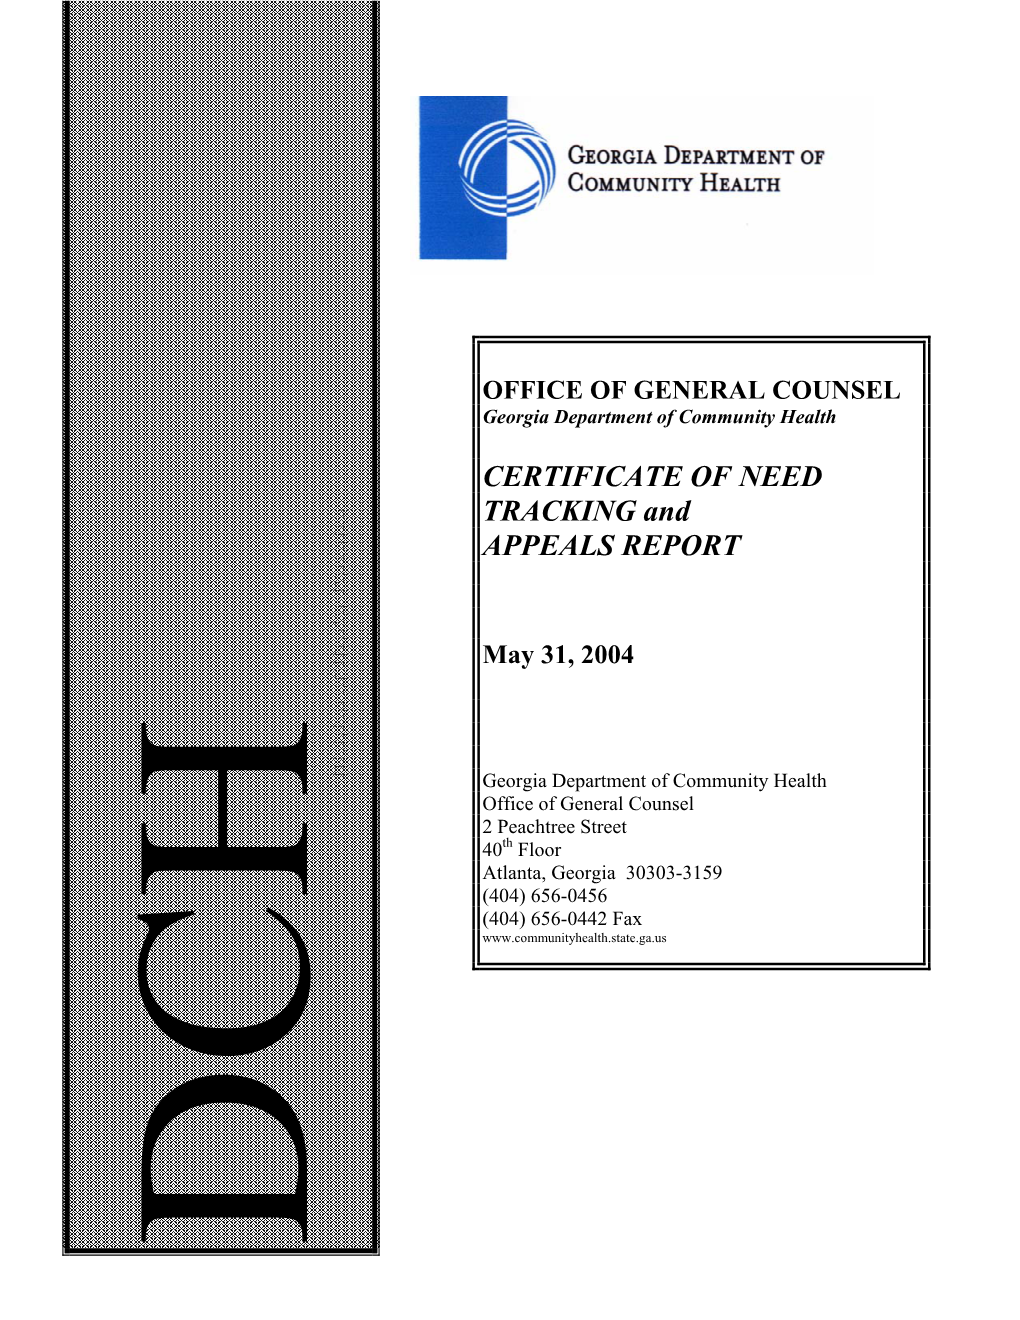 Certificate of Need Tracking and Appeals Report